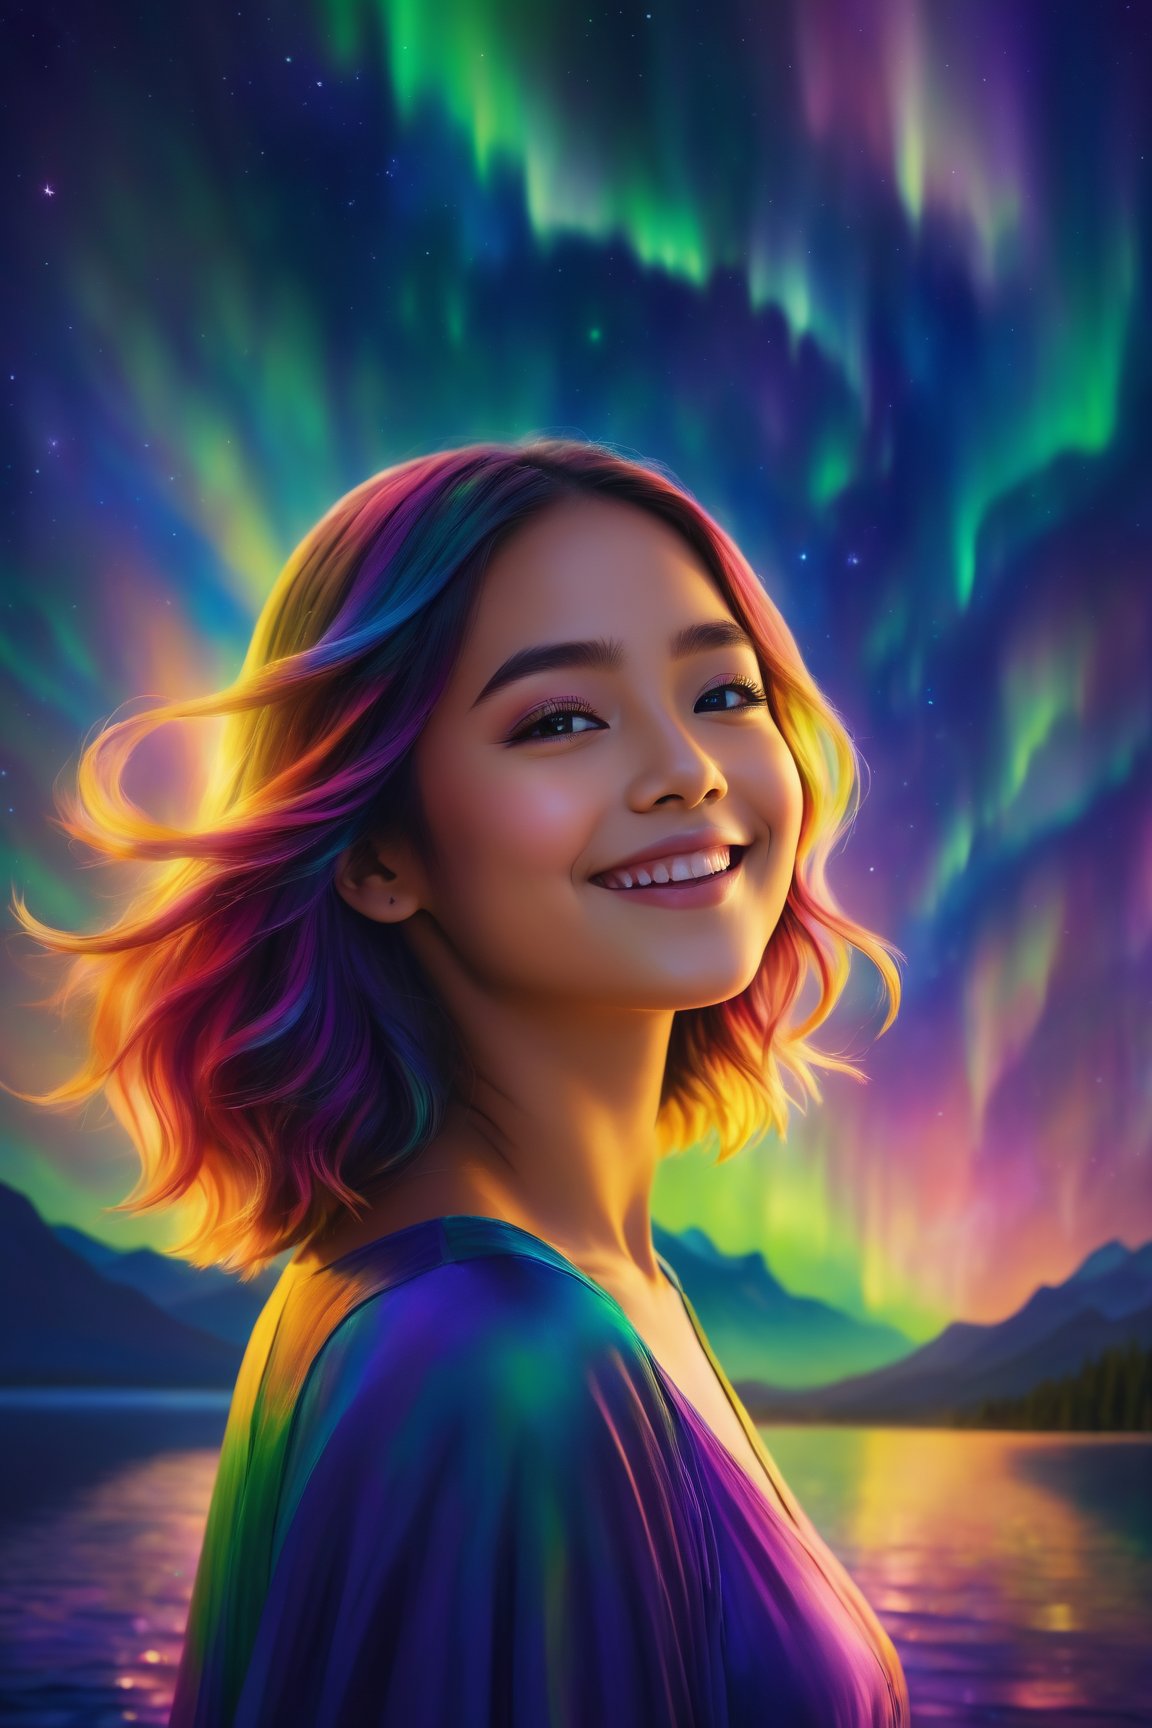 (best quality, 8K, highres, masterpiece), ultra-detailed, (super colorful, vibrant), enchanting image of a beautiful girl with a shoulder-length angled blunt-ends hairstyle. Her smile radiates warmth and positivity without any hint of arrogance. She stands gracefully under the mesmerizing glow of the aurora borealis in a vibrant night scene. The surrounding atmosphere is filled with a kaleidoscope of colors, creating a vibrant and ethereal dance of light. The girl embodies Nocturnal Grace, exuding Silent Luminescence amidst the Midnight Flutter of colors and the Whispering Silent beauty of the night. Every moment is an Iridescent Encounter with the Moonlit Shadow, celebrating a captivating and colorful display of artistry.